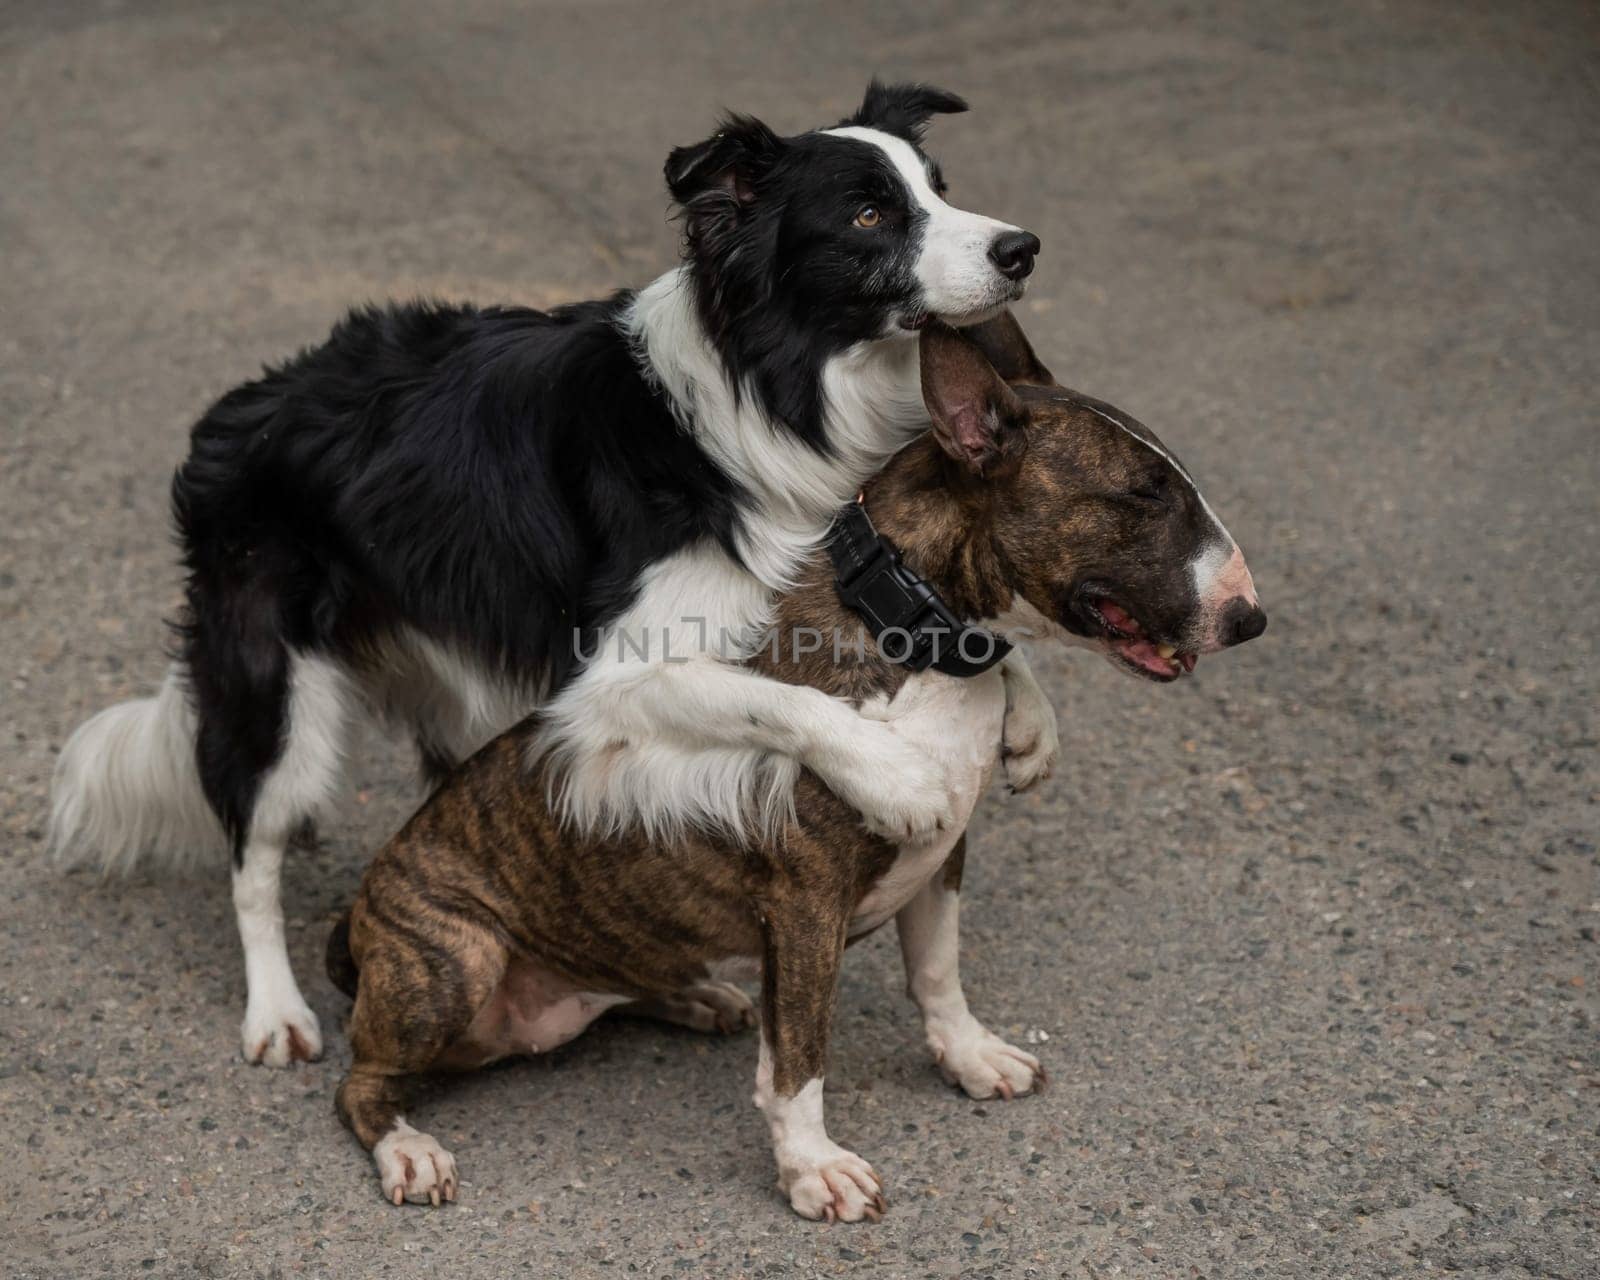 Black and white border collie hugging a brindle bull terrier on a walk. by mrwed54